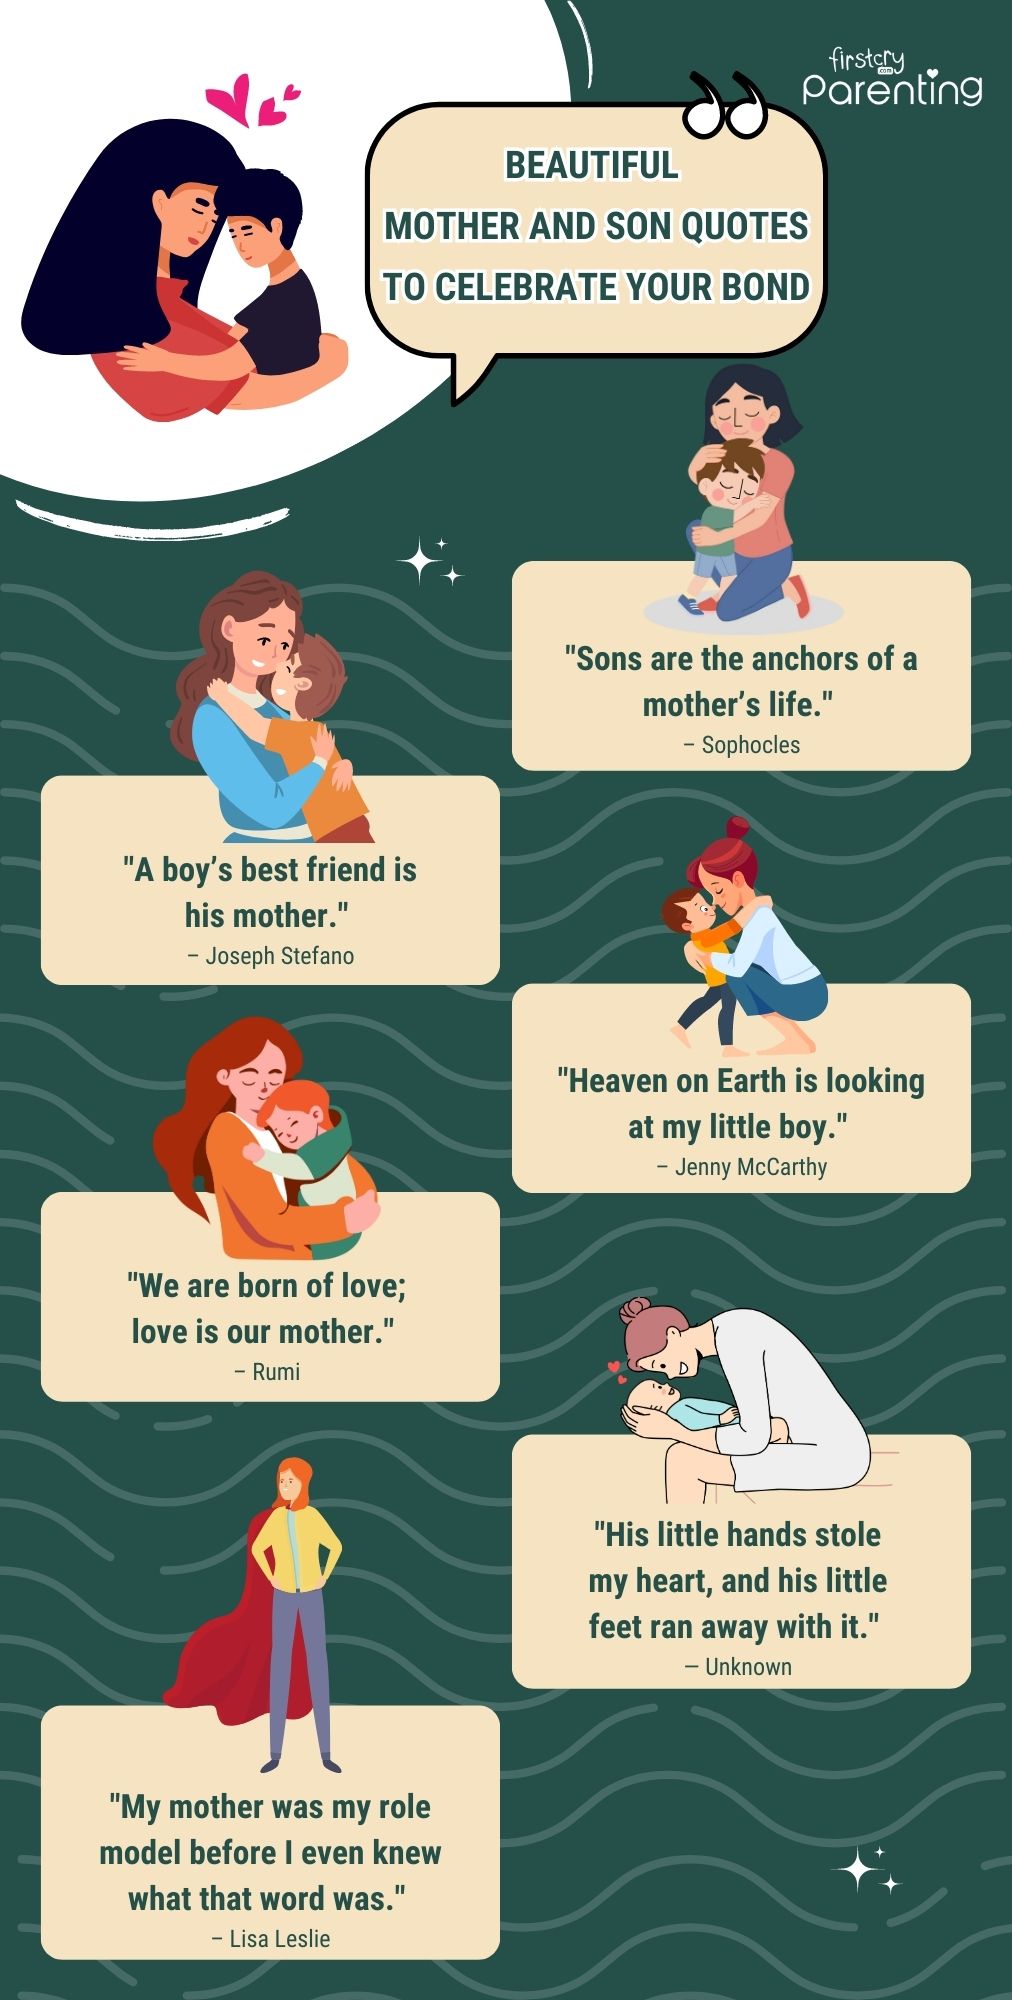 Beautiful Mother and Son Quotes to Celebrate Your Bond - Infographic